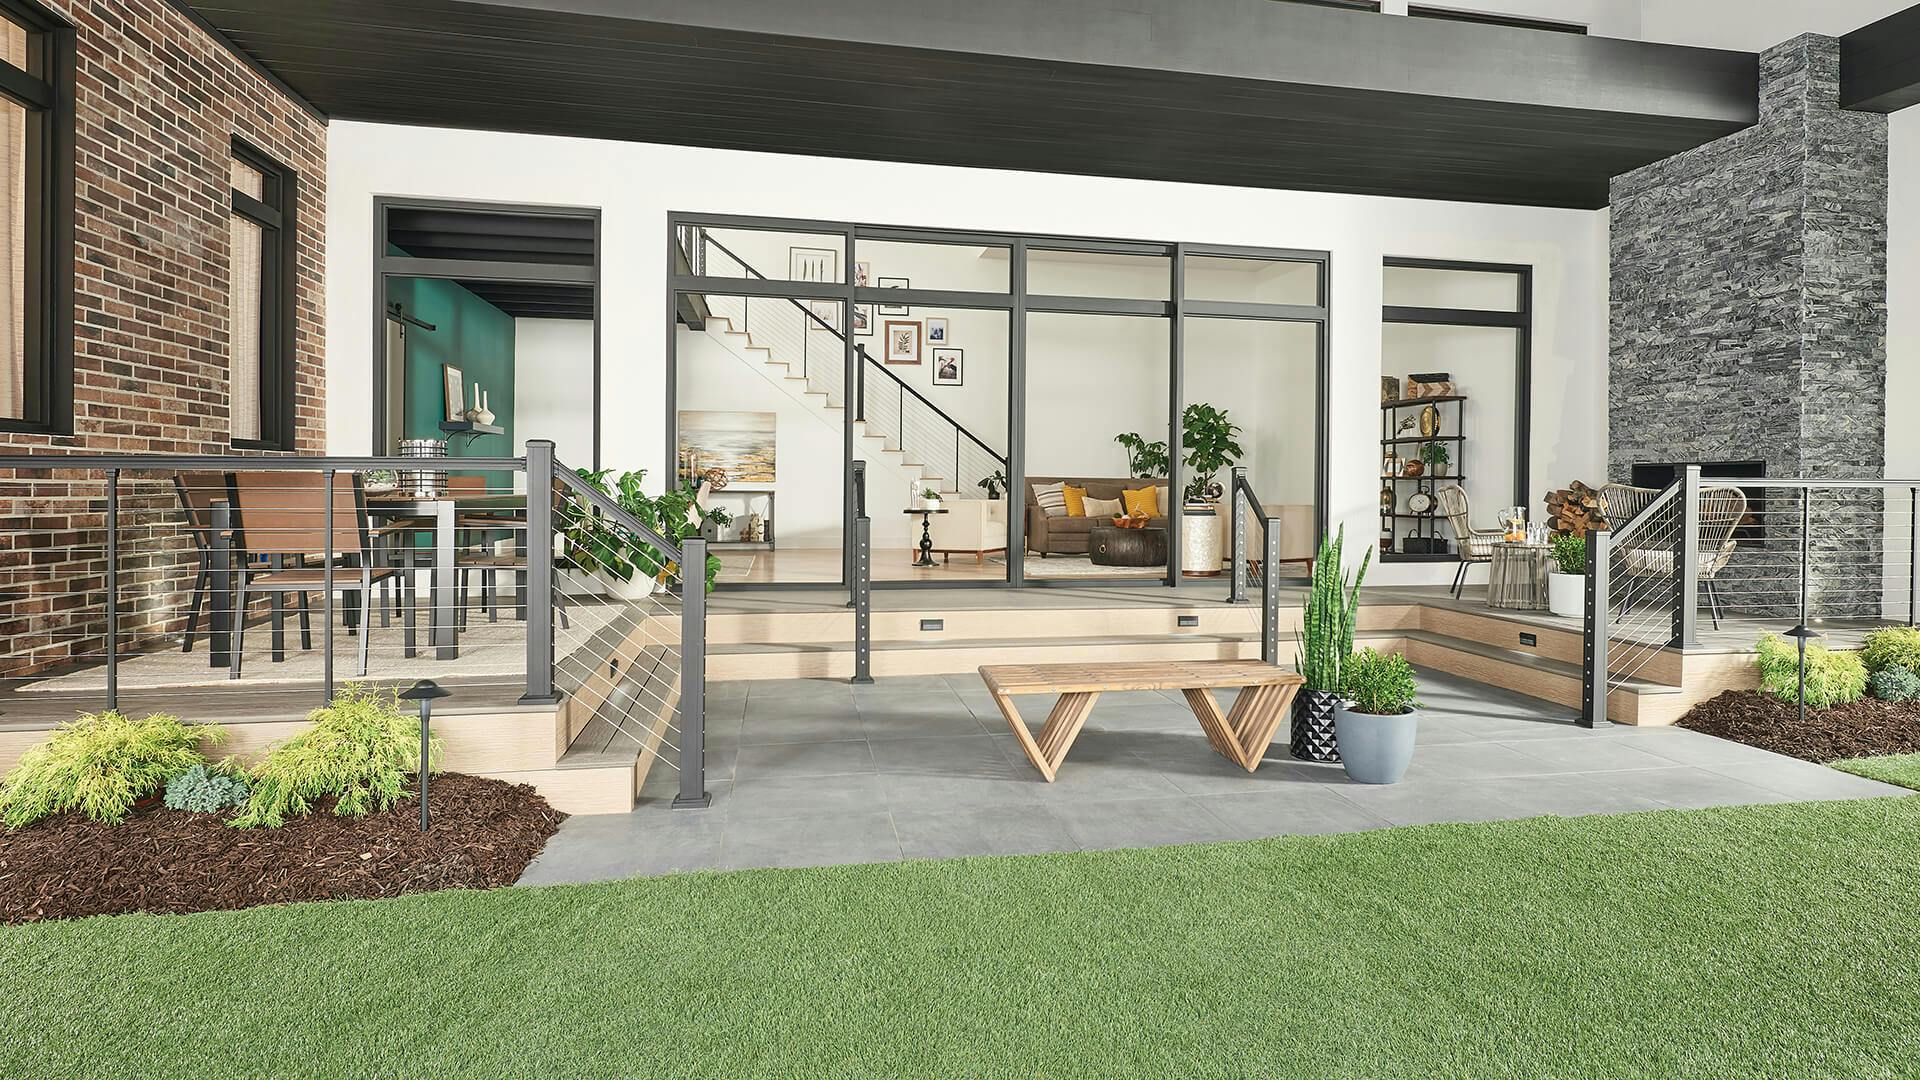 Patio yard space with view into home's living room during the day